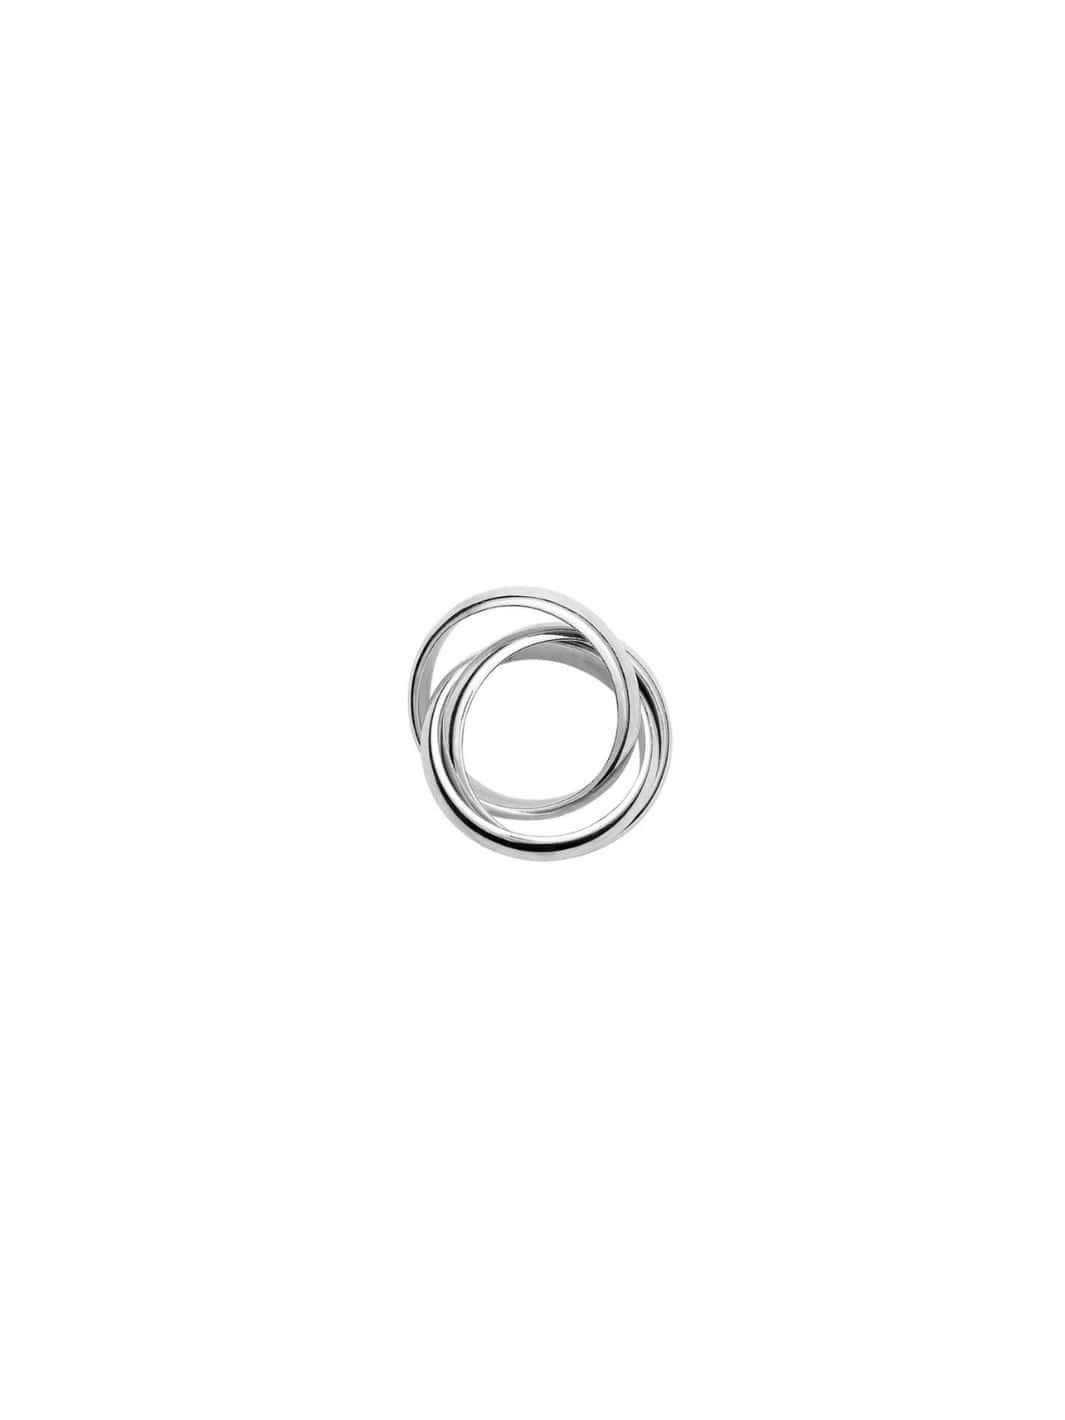 Lié Studio Accessories Ring | The Sofie Ring Silver